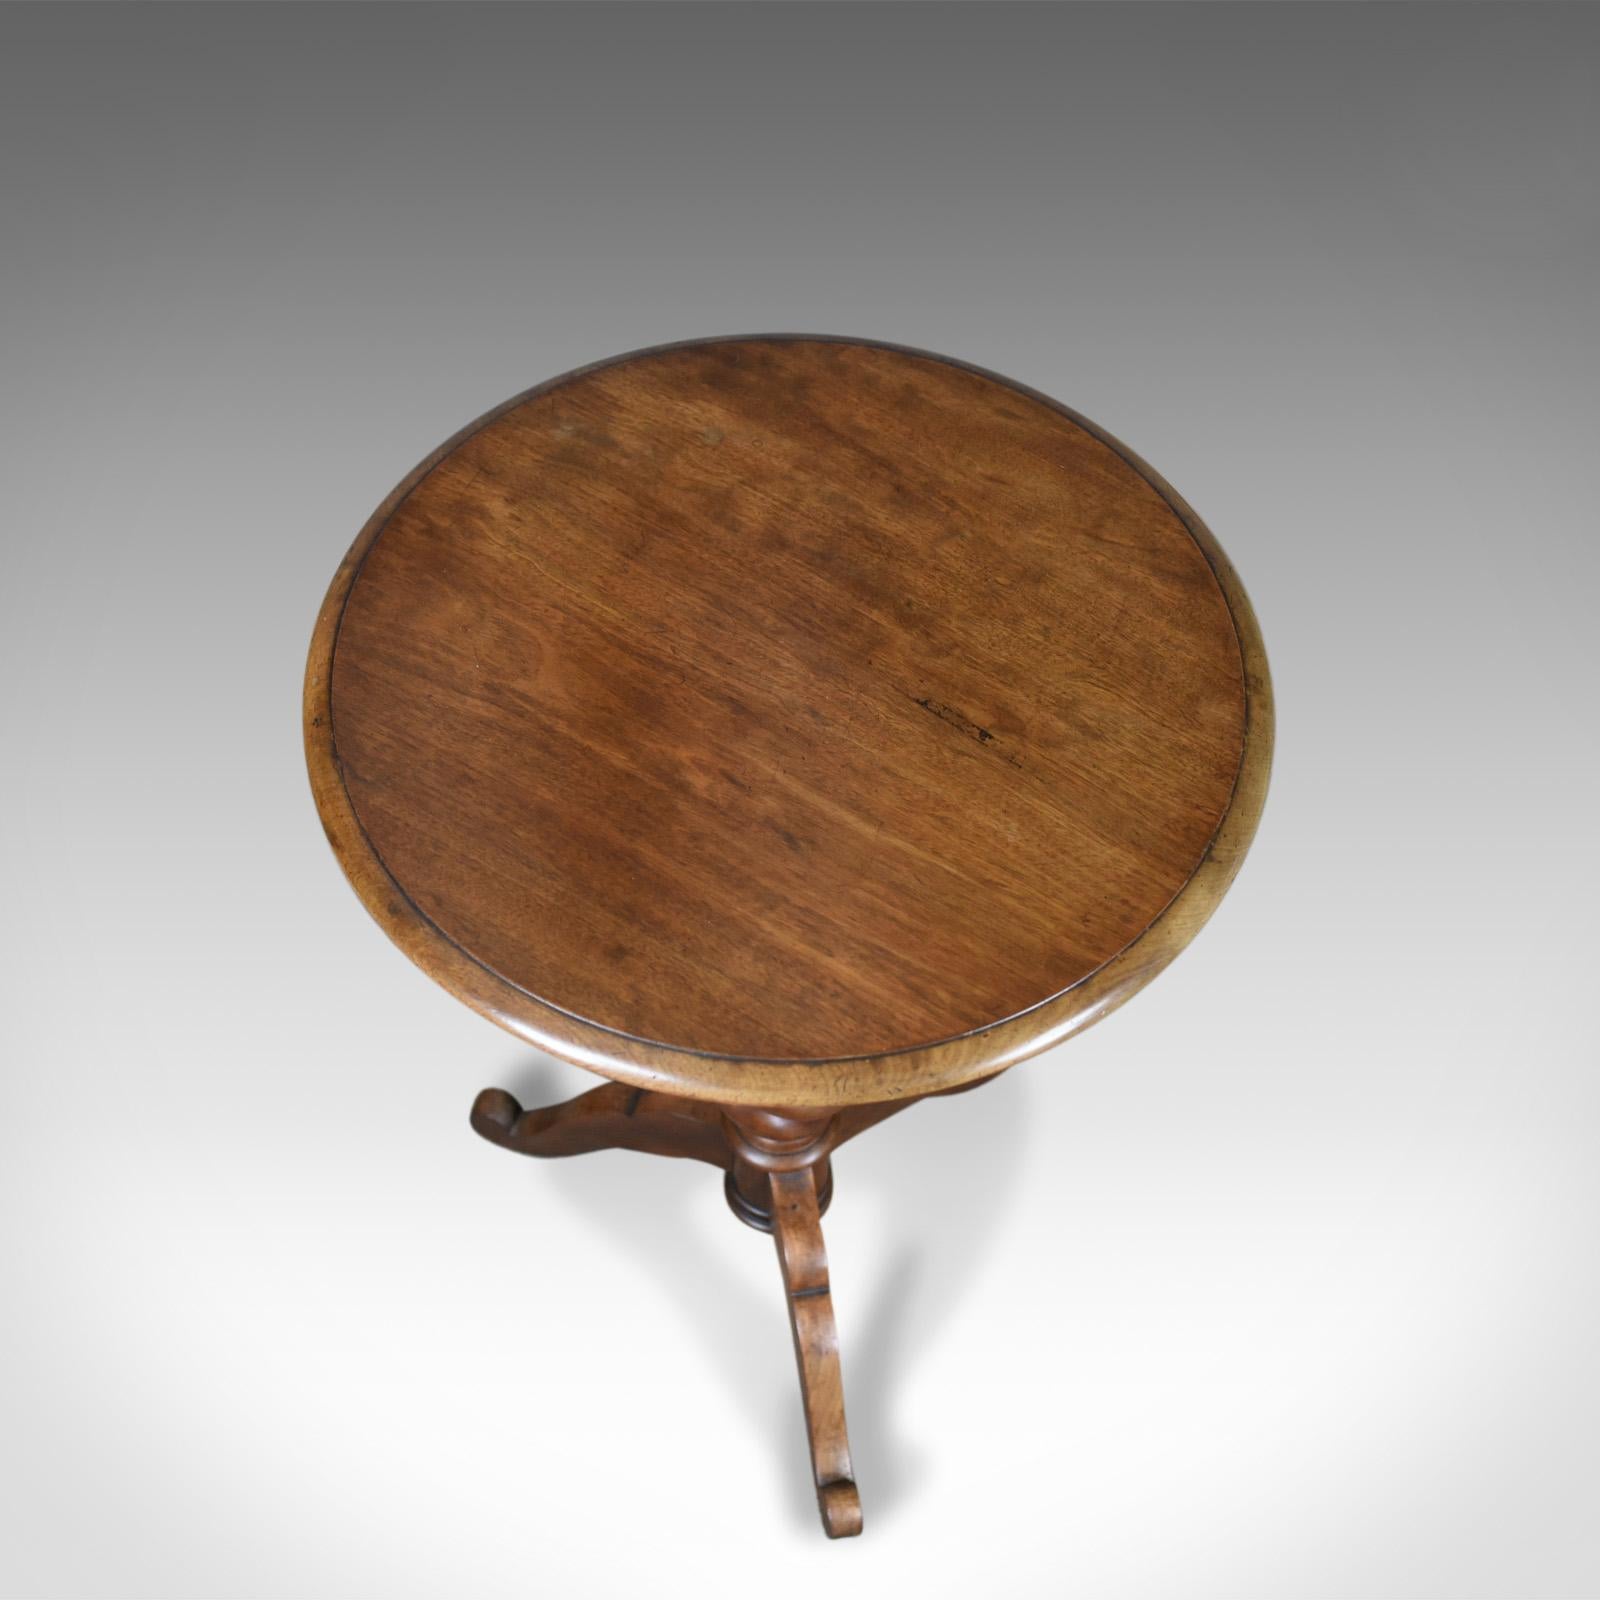 This is an antique wine table, an English, Victorian, mahogany, tripod side table with an attractive bulbous barley twist stem, mid-19th century, circa 1860.

Appealing russet tones to the select mahogany
Displaying grain interest with a wax